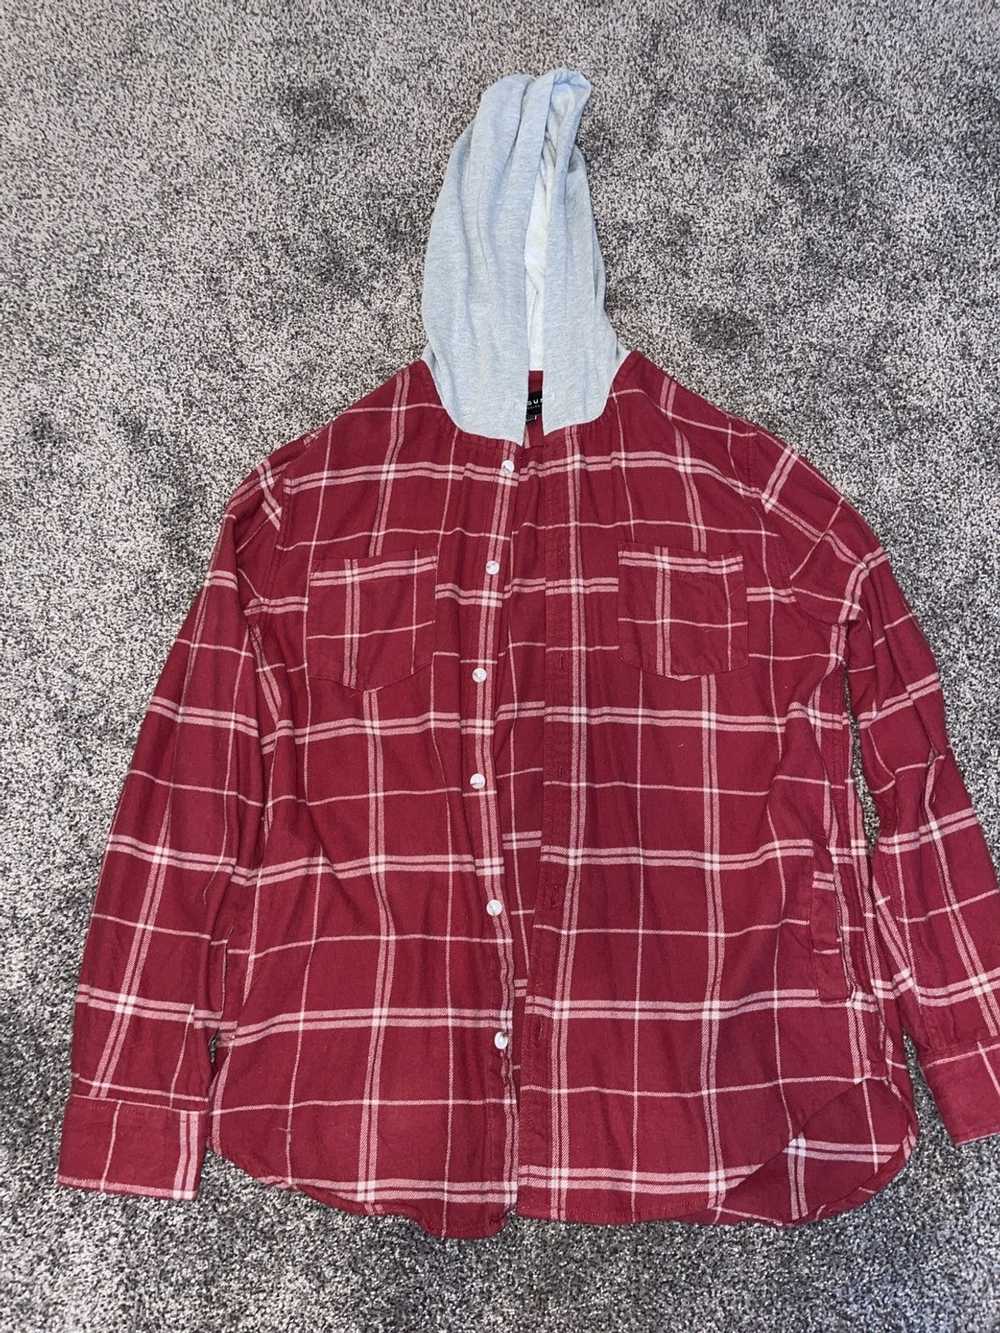 Pacsun Flannel Hoodie Red - image 1